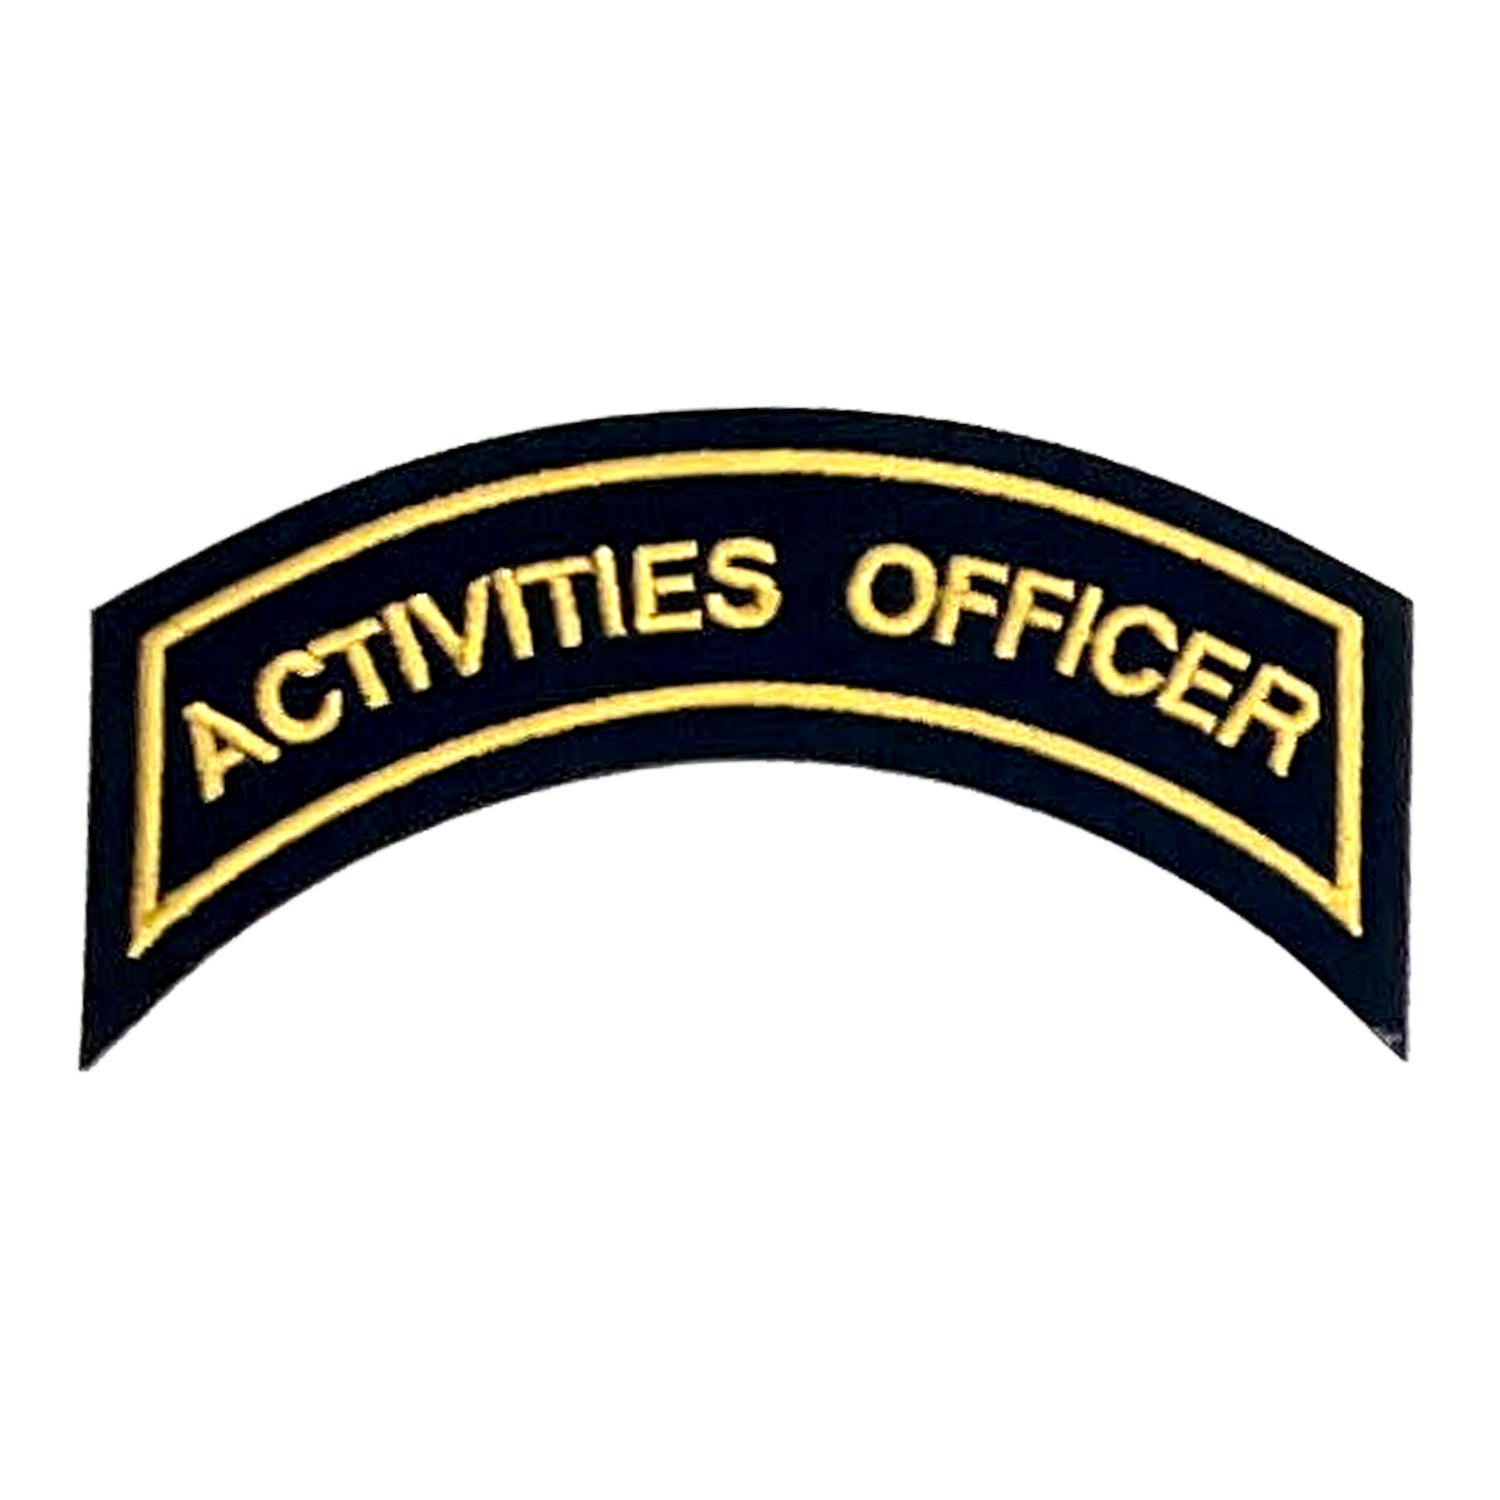 ACTIVITIES OFFICER Patch In Gold